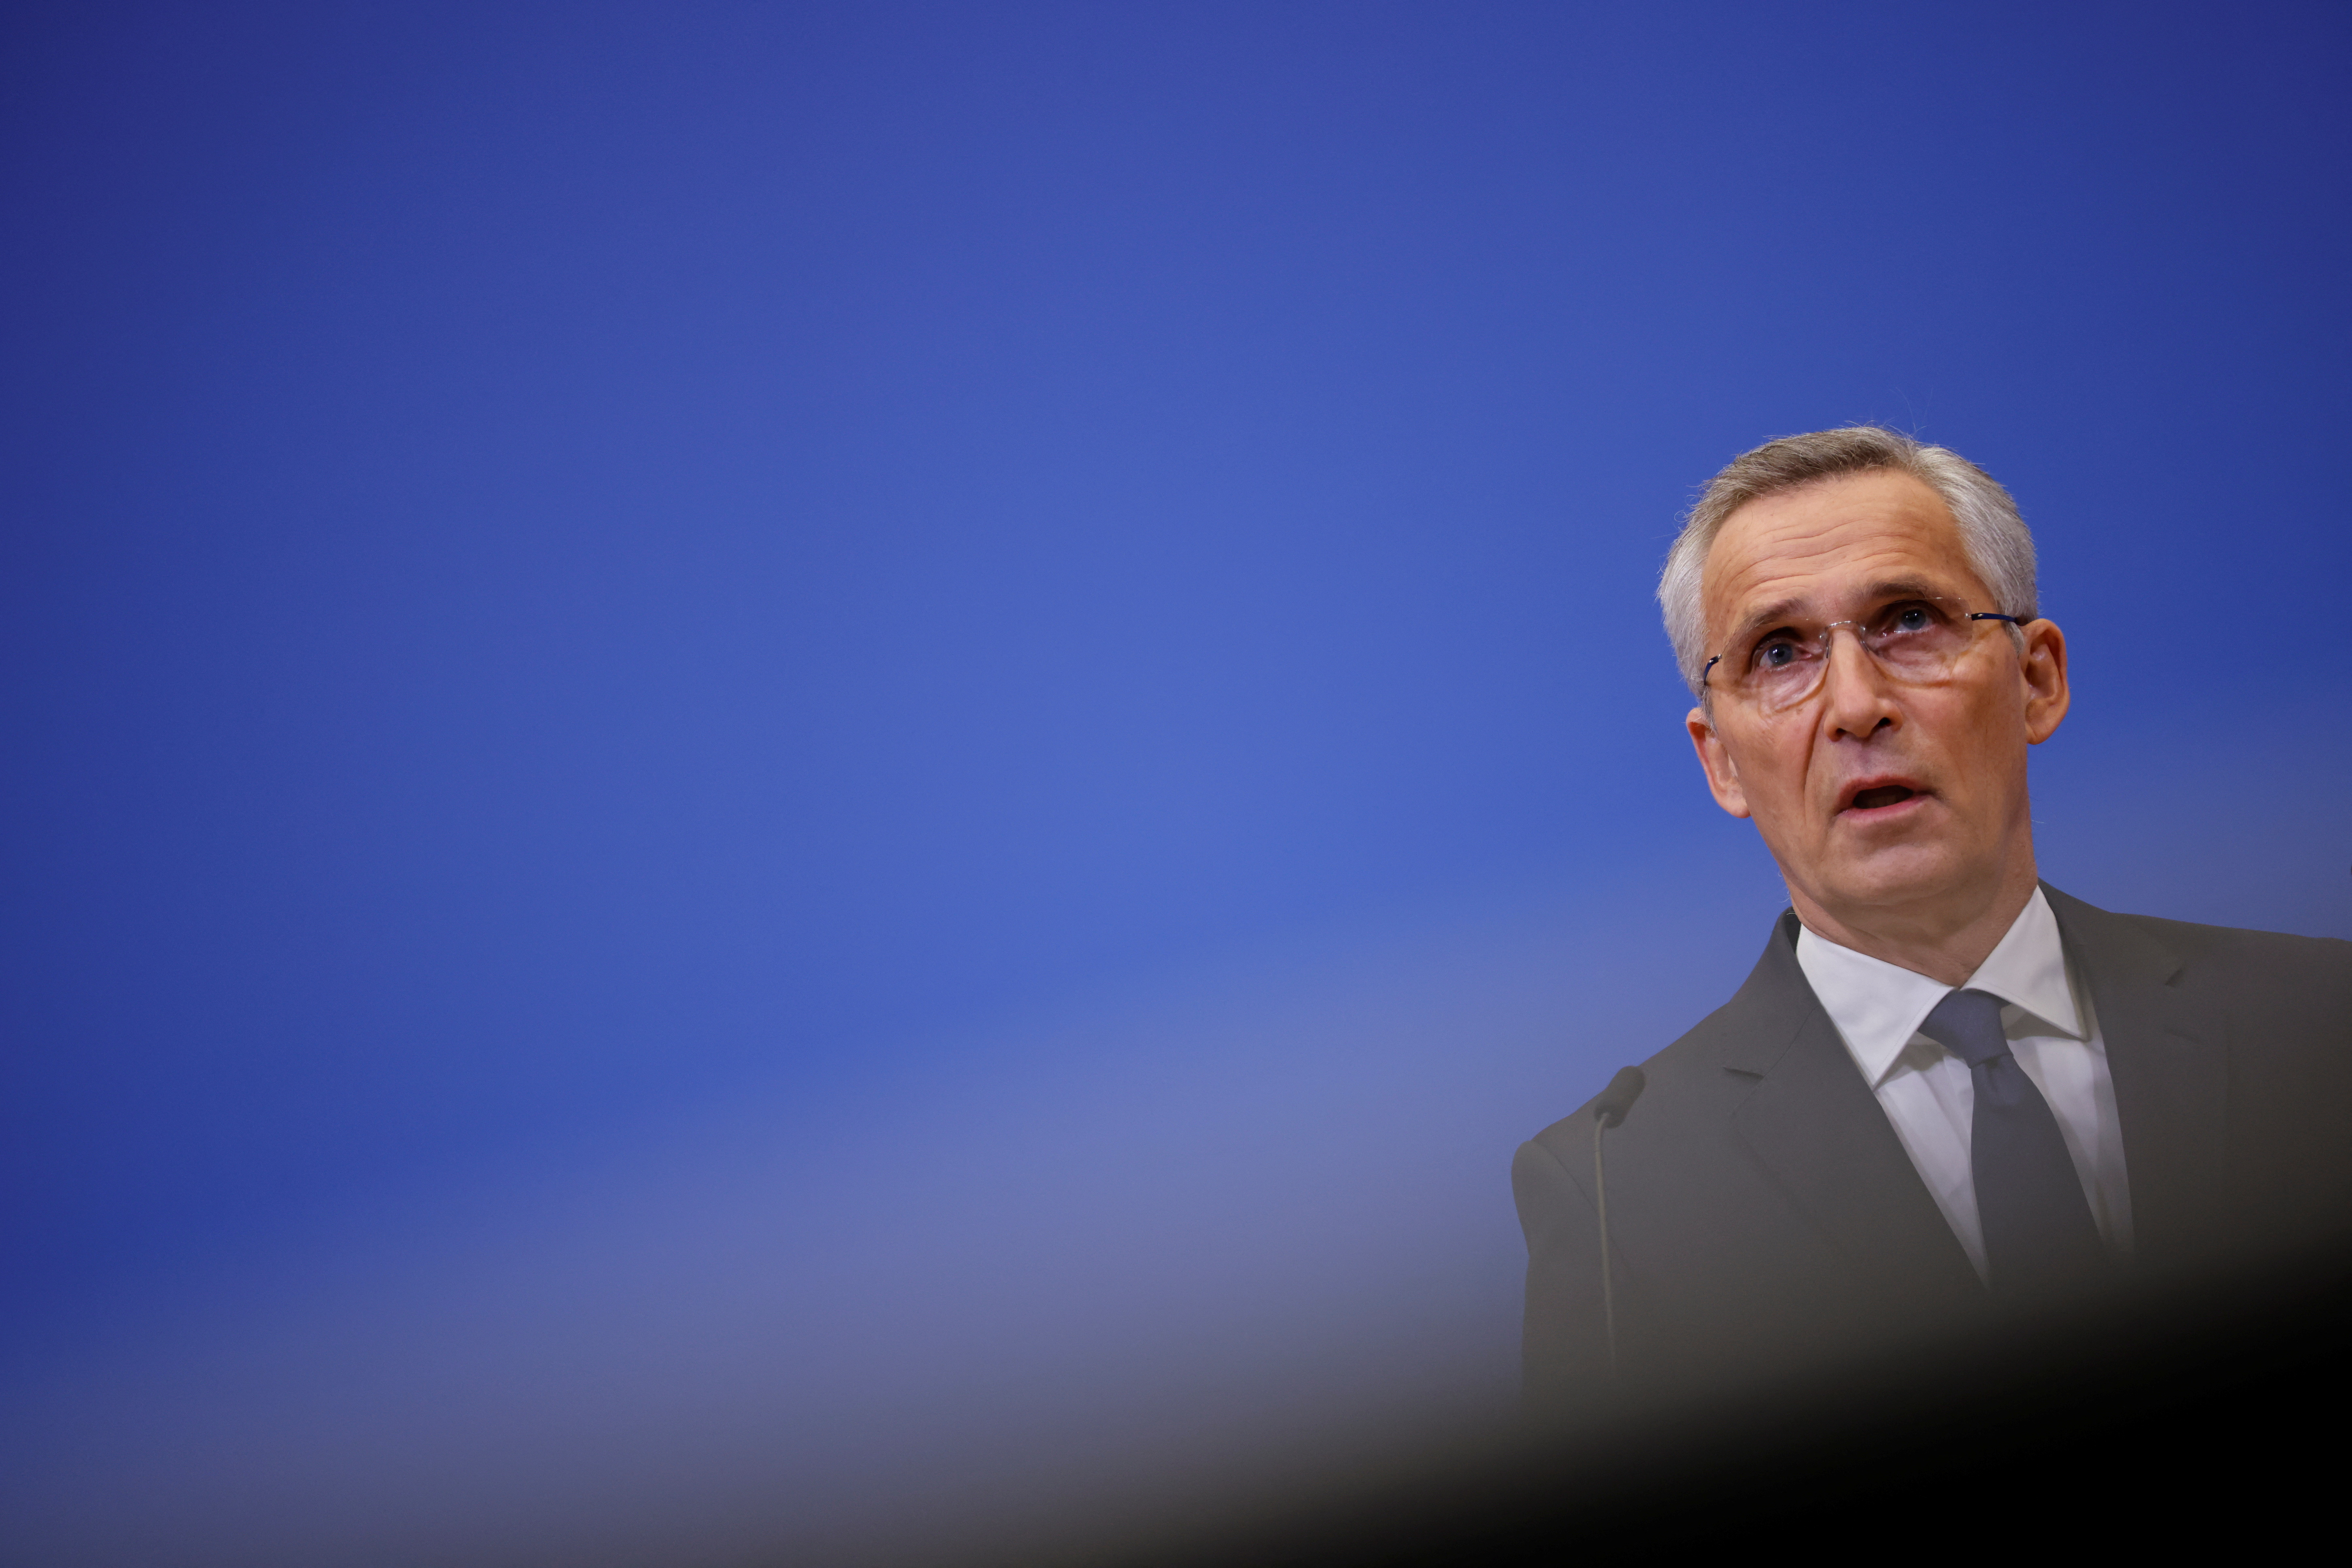 NATO Secretary General Stoltenberg holds news conference in Brussels